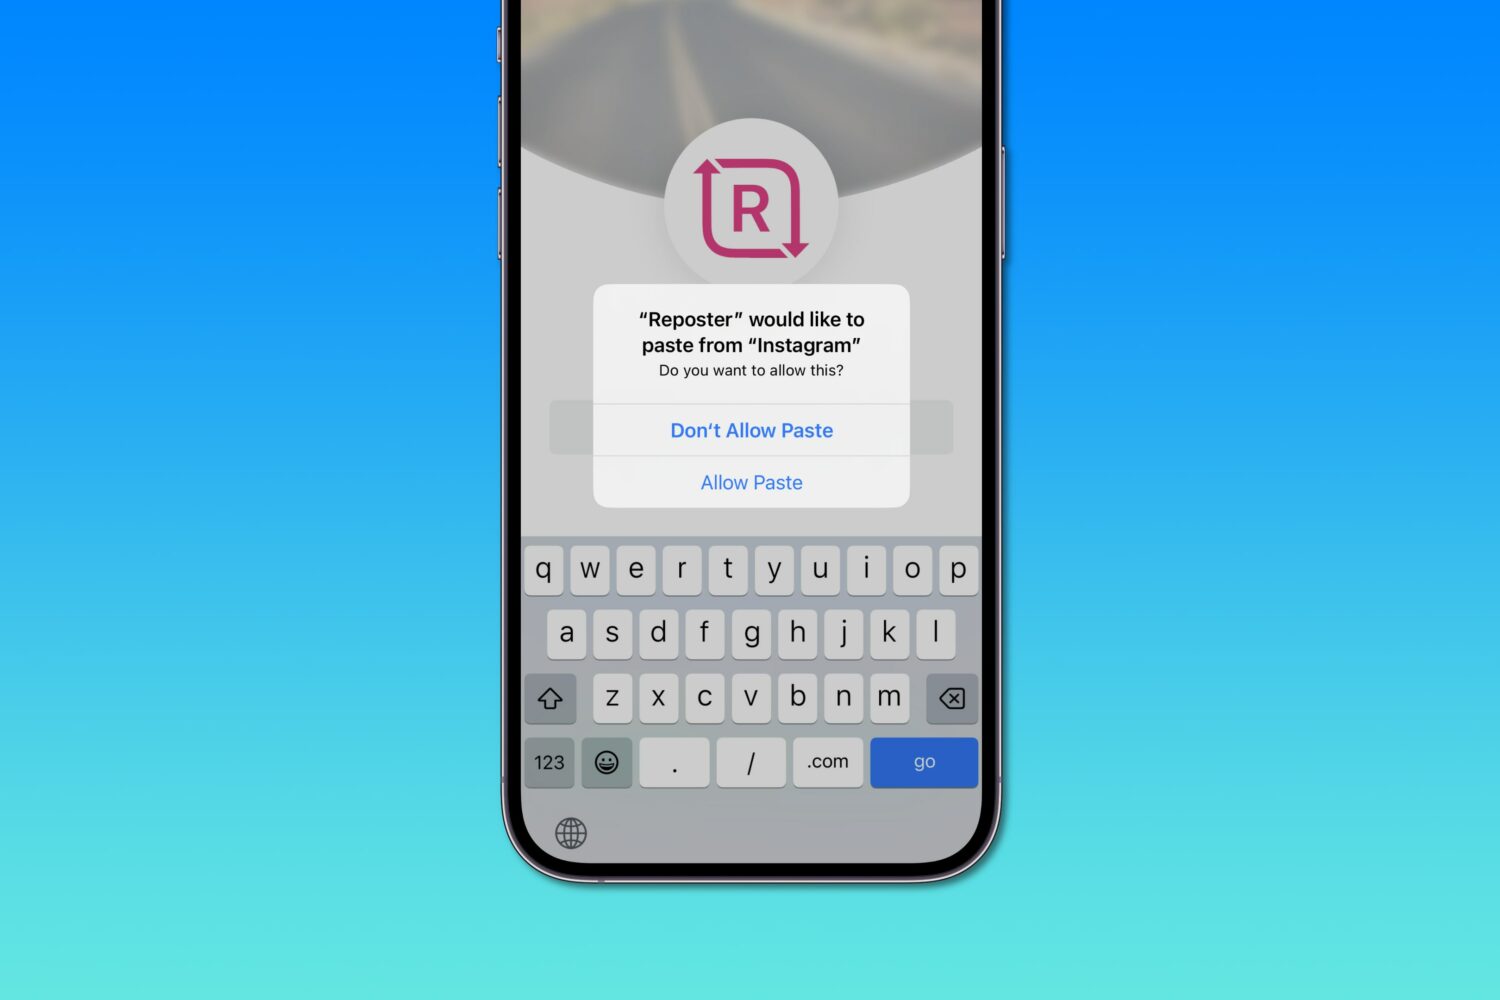 iOS 16's excessive clipboard paste permission prompt in the Reposter app on iPhone